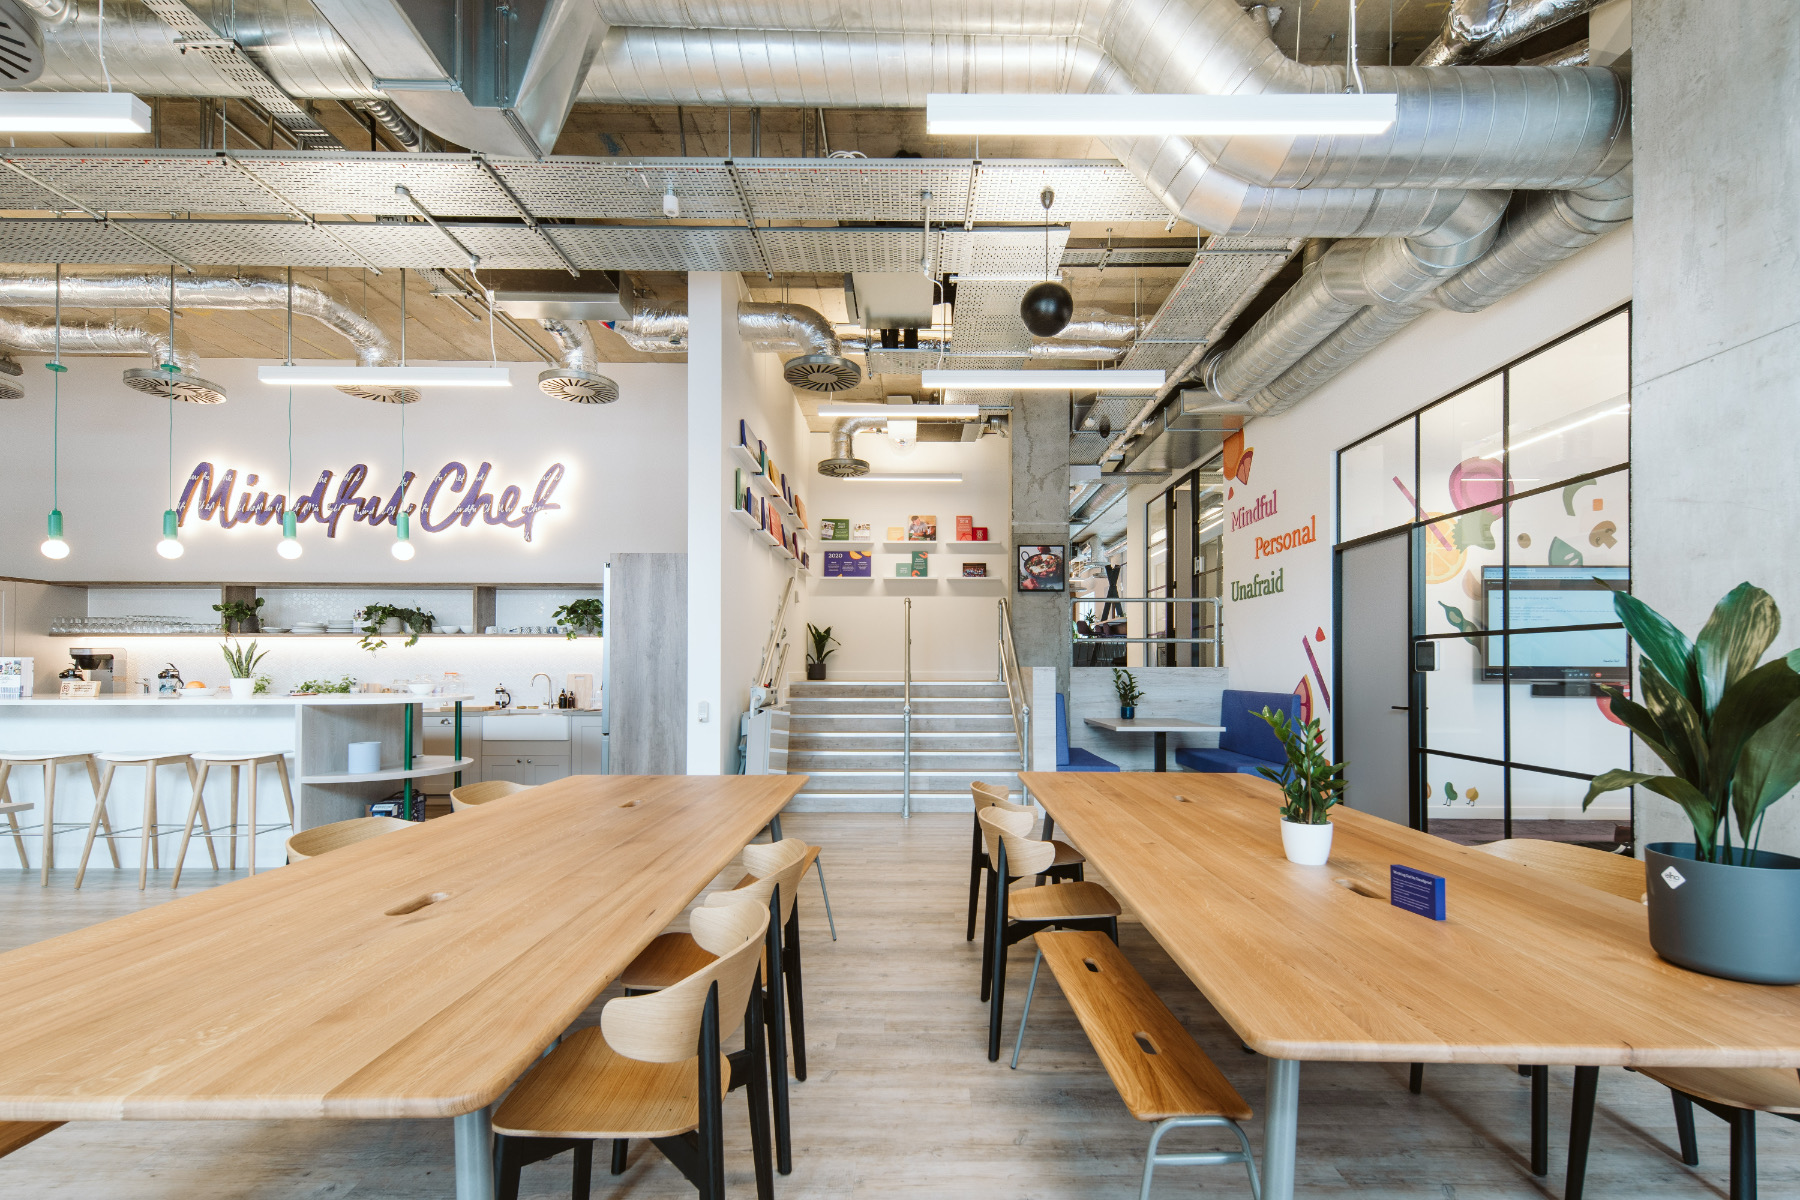 A Look Inside Mindful Chef's New London Office - Officelovin'